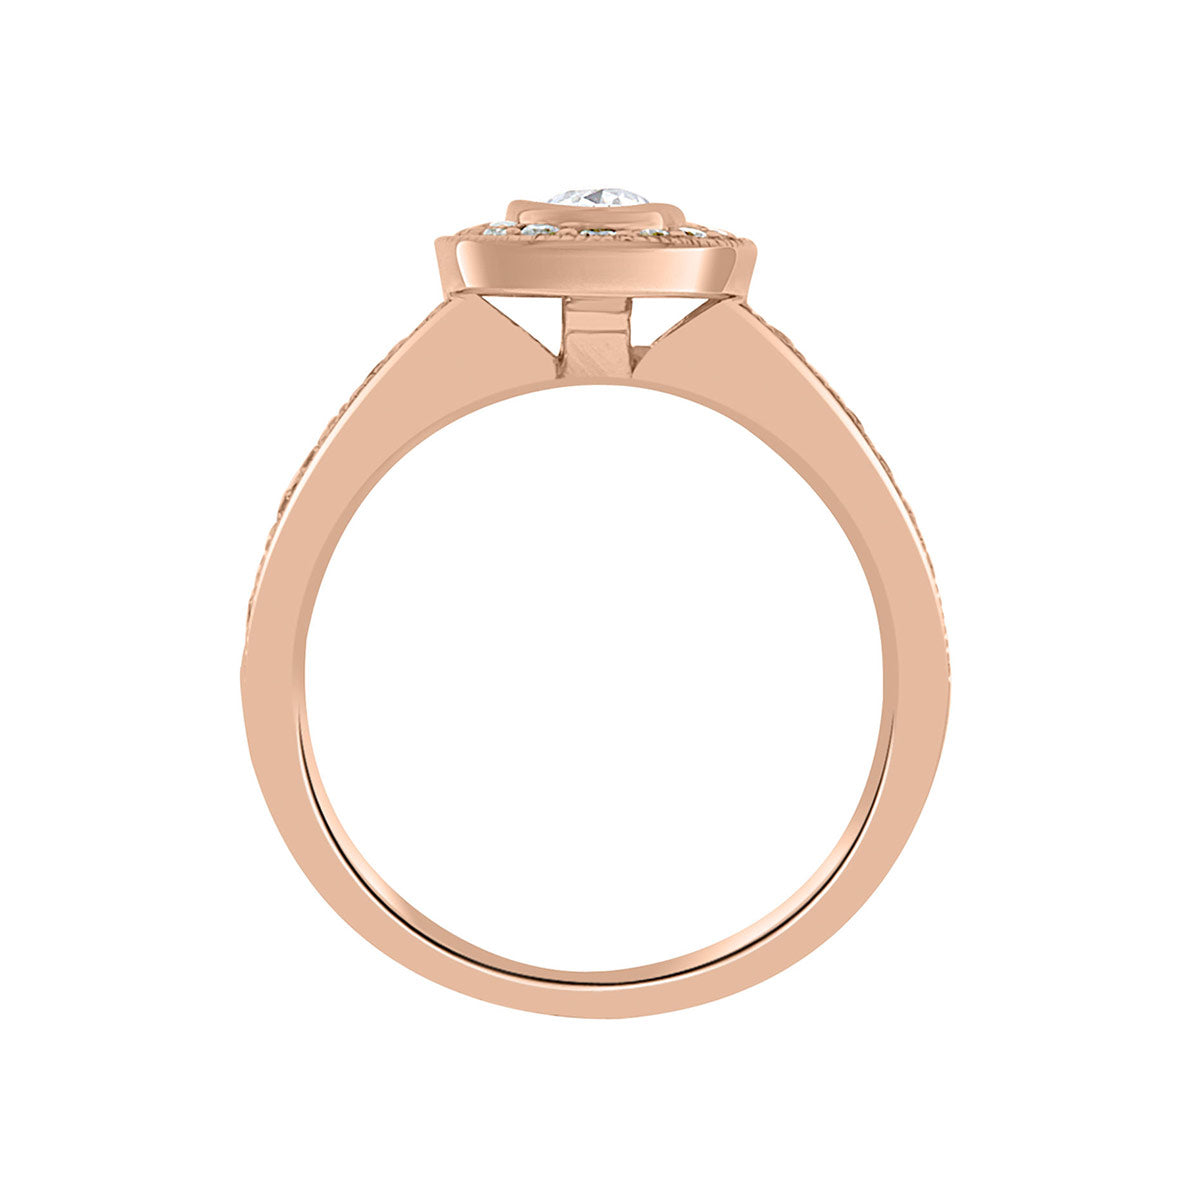 Milgrain Detail Engagement Ring in rose gold pictured in an upright position